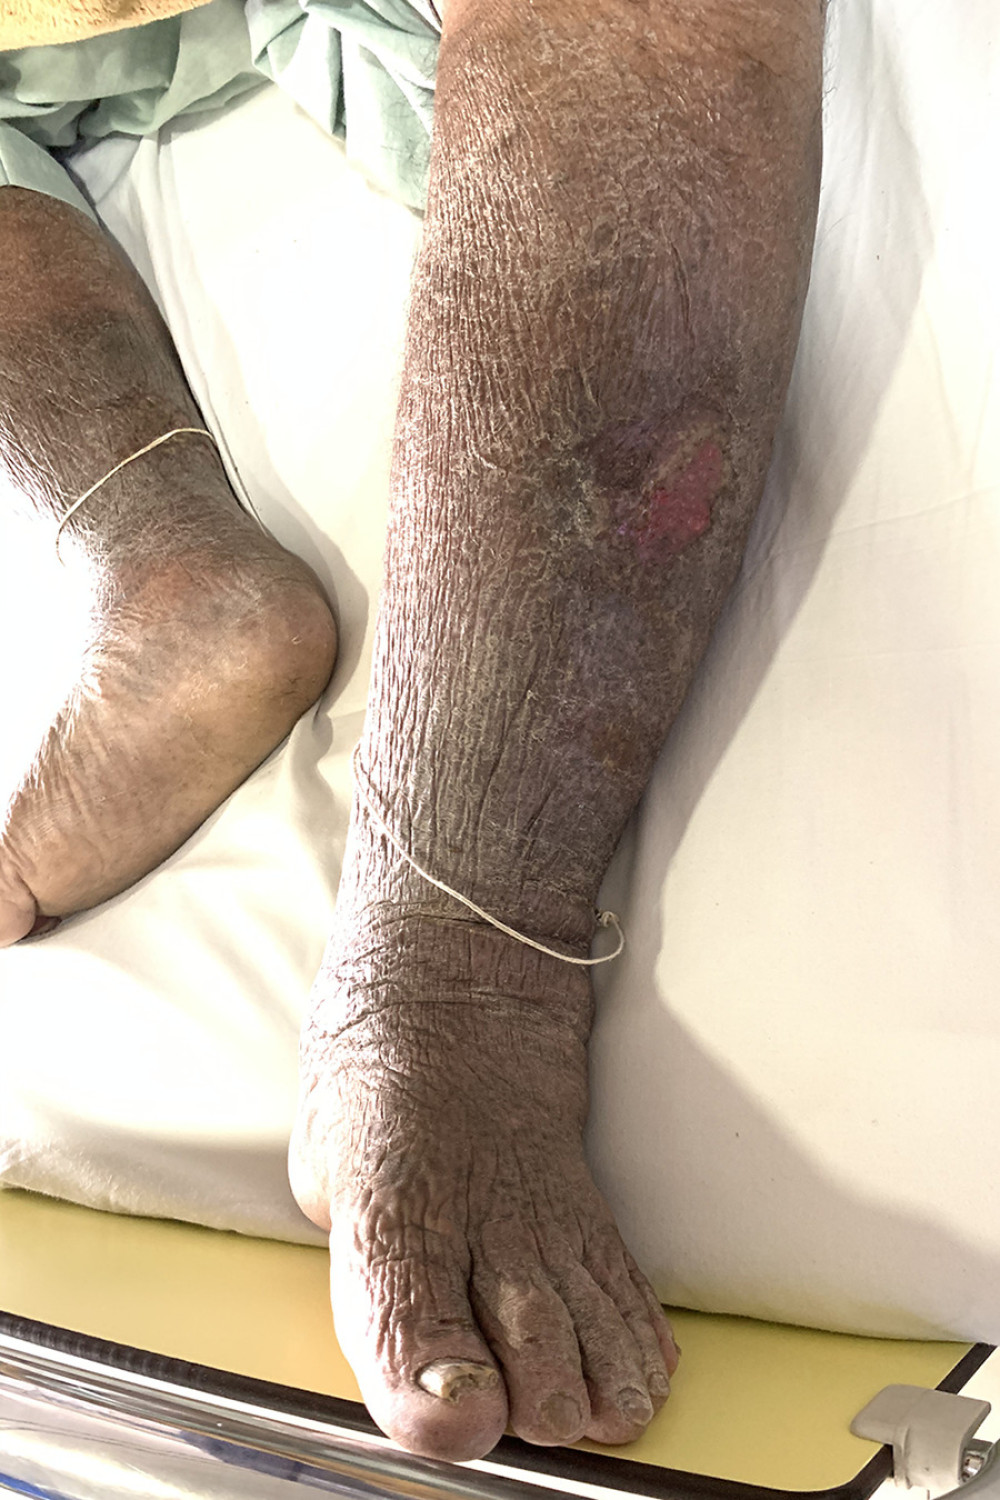 Numerous verrucous folds and cobblestone-like nodules, and plaques and a painless ulcer on the left leg.